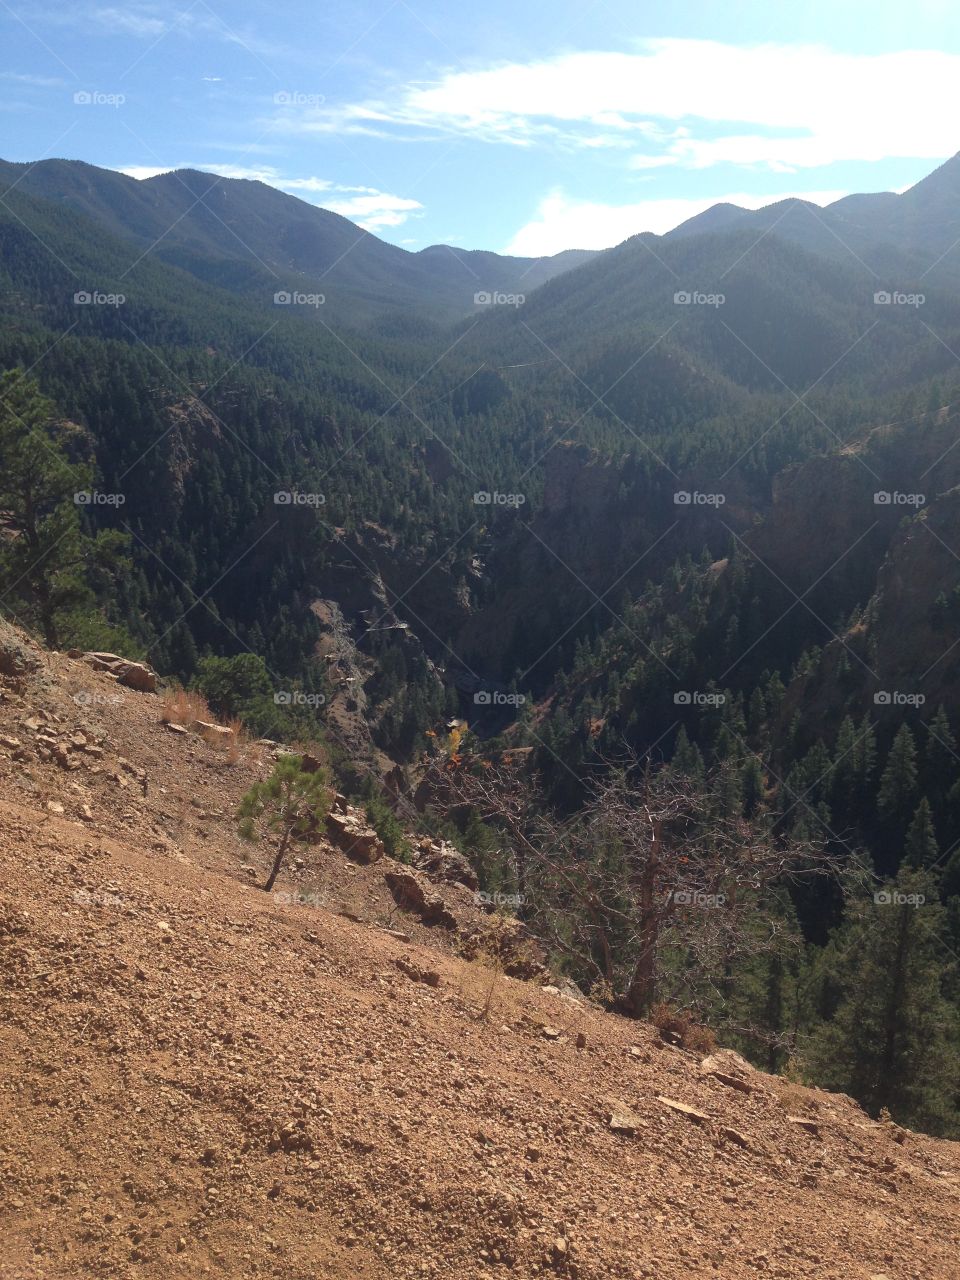 Mountains in Cheyenne canyon